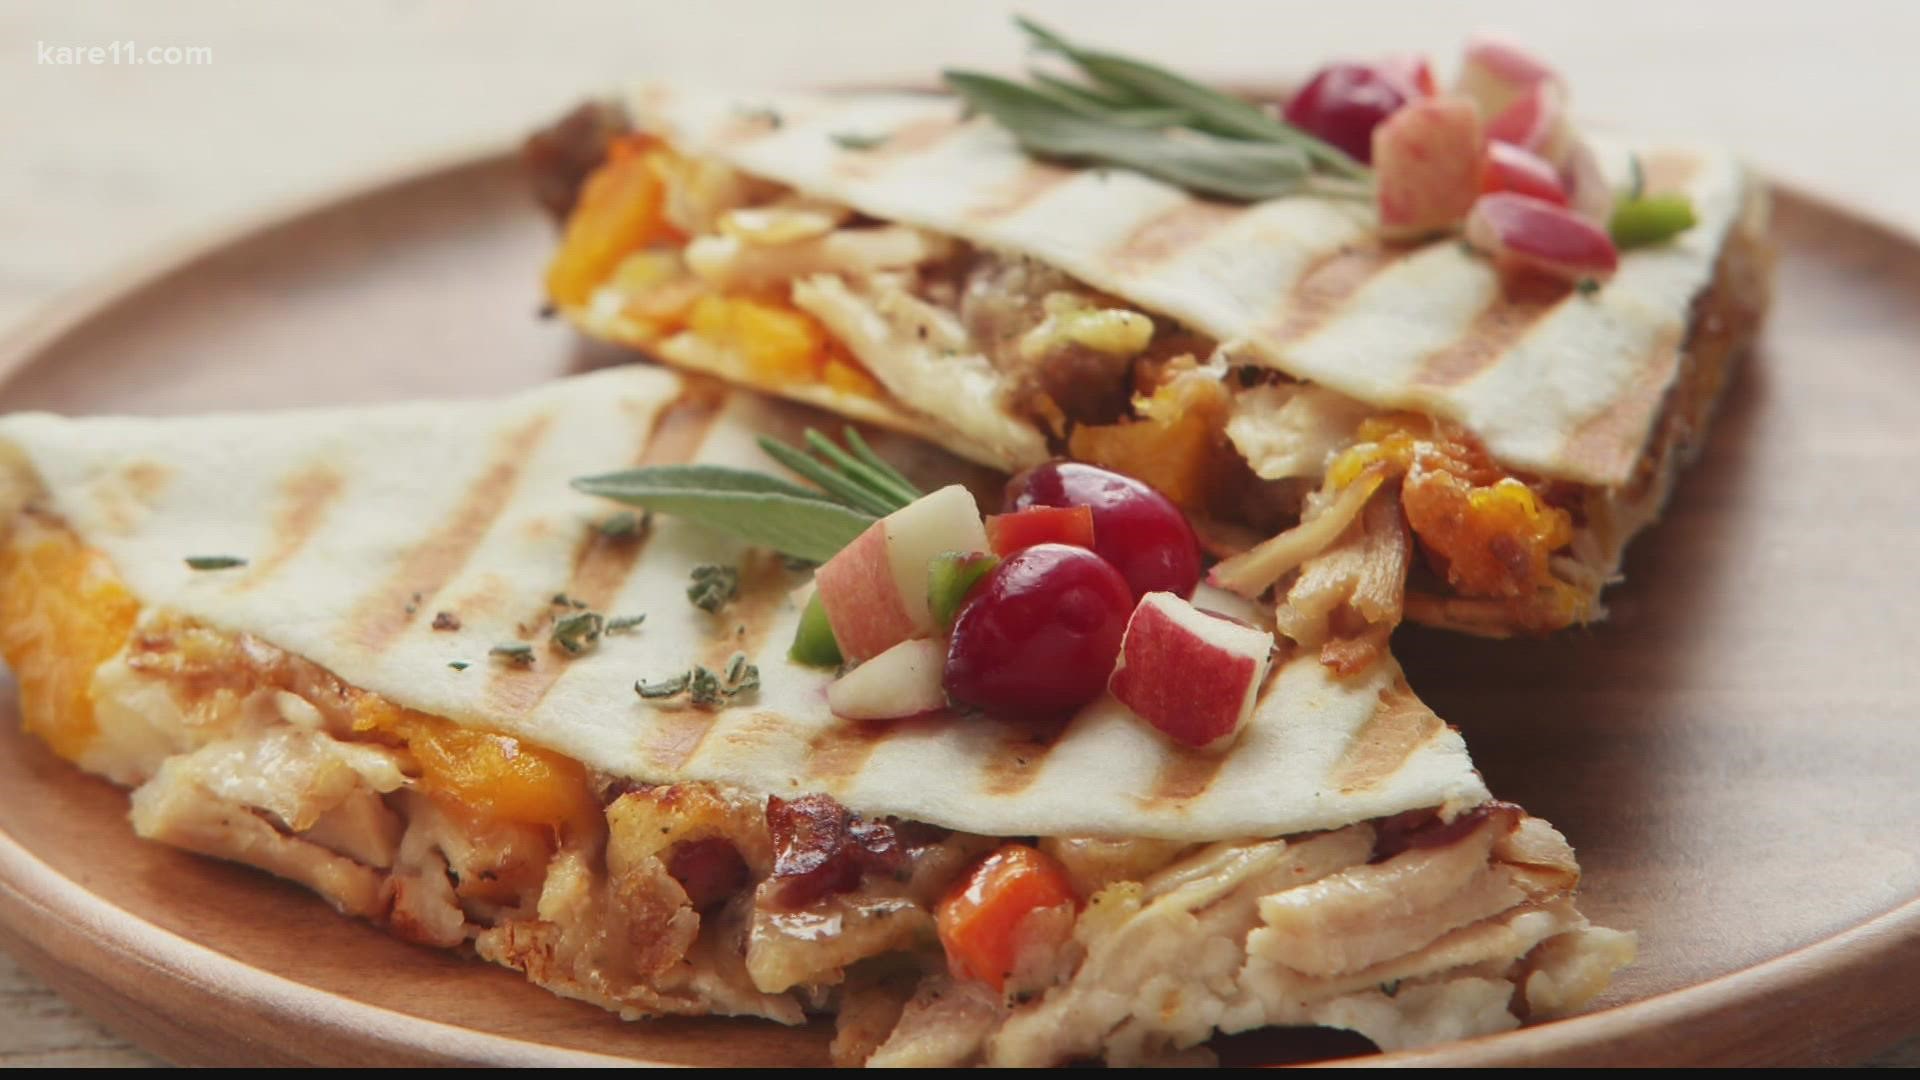 Using your Thanksgiving Day leftovers you can whip up some easy turkey quesadillas.